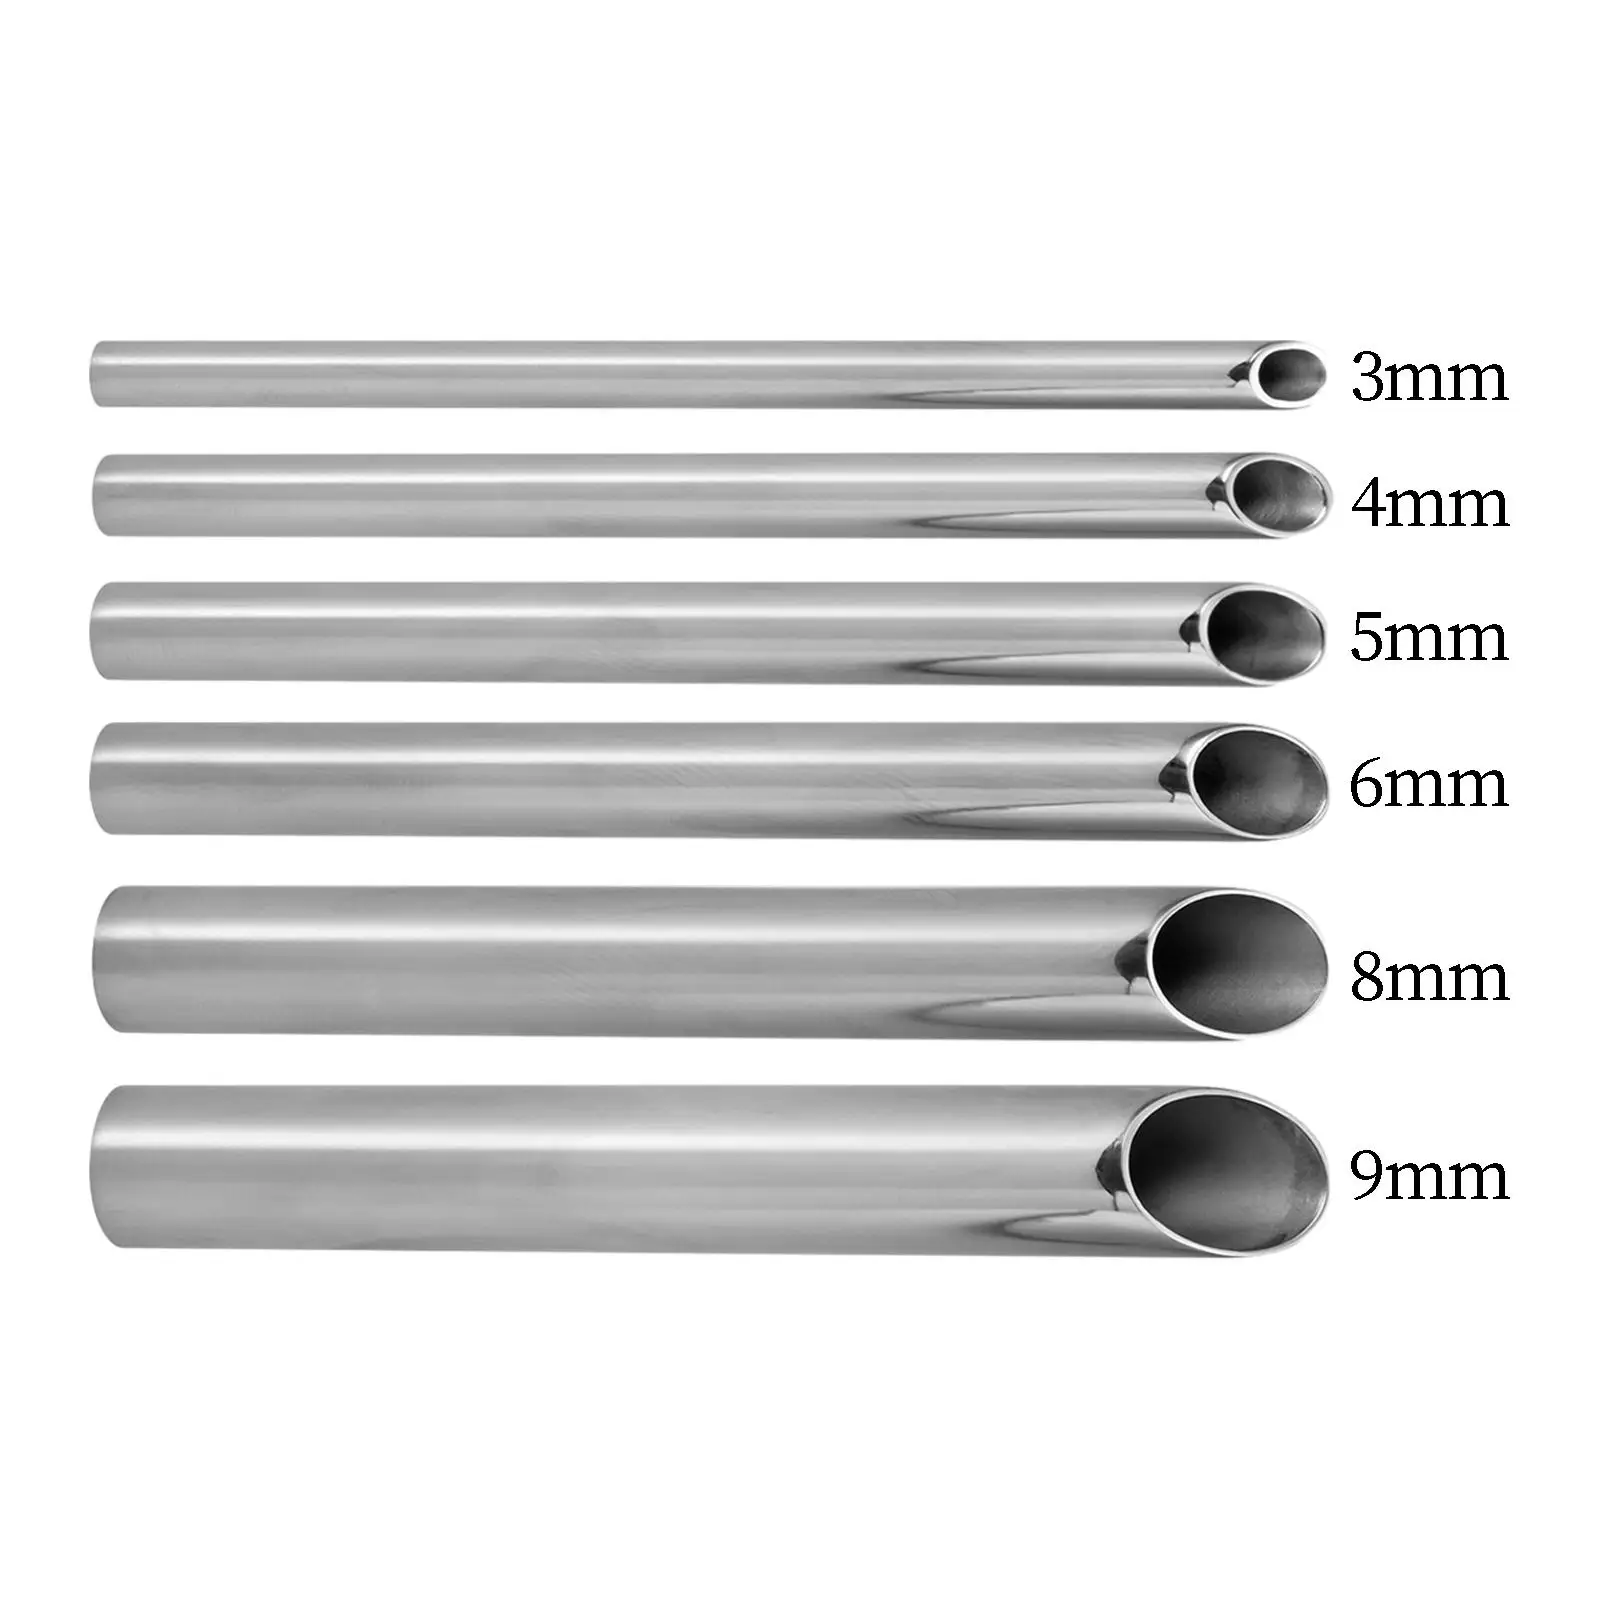 Steel Piercing Receiver Tube Auxiliary Professional Tool Accessory Easy to Use Length 7.5cm for Body Navel Ear